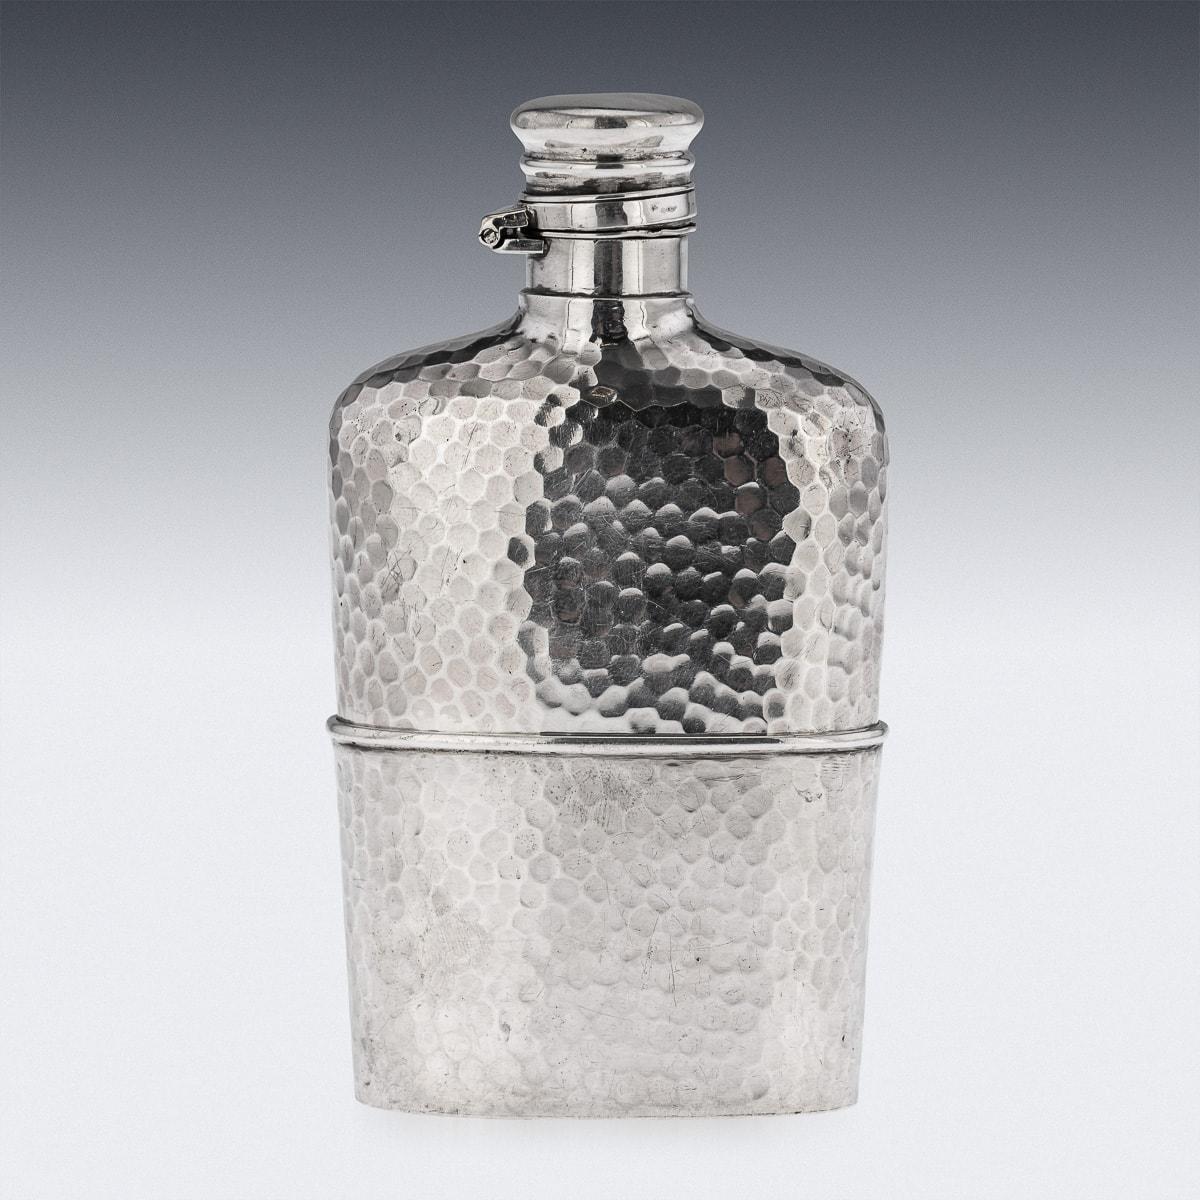 Antique 19th Century American solid silver hip flask with silver hinged top and removable cup. This flask has an outer design of a hammered pattern. Hallmarked sterling silver (925 standard), circa 1880, Makers mark for Gorham, Rhode